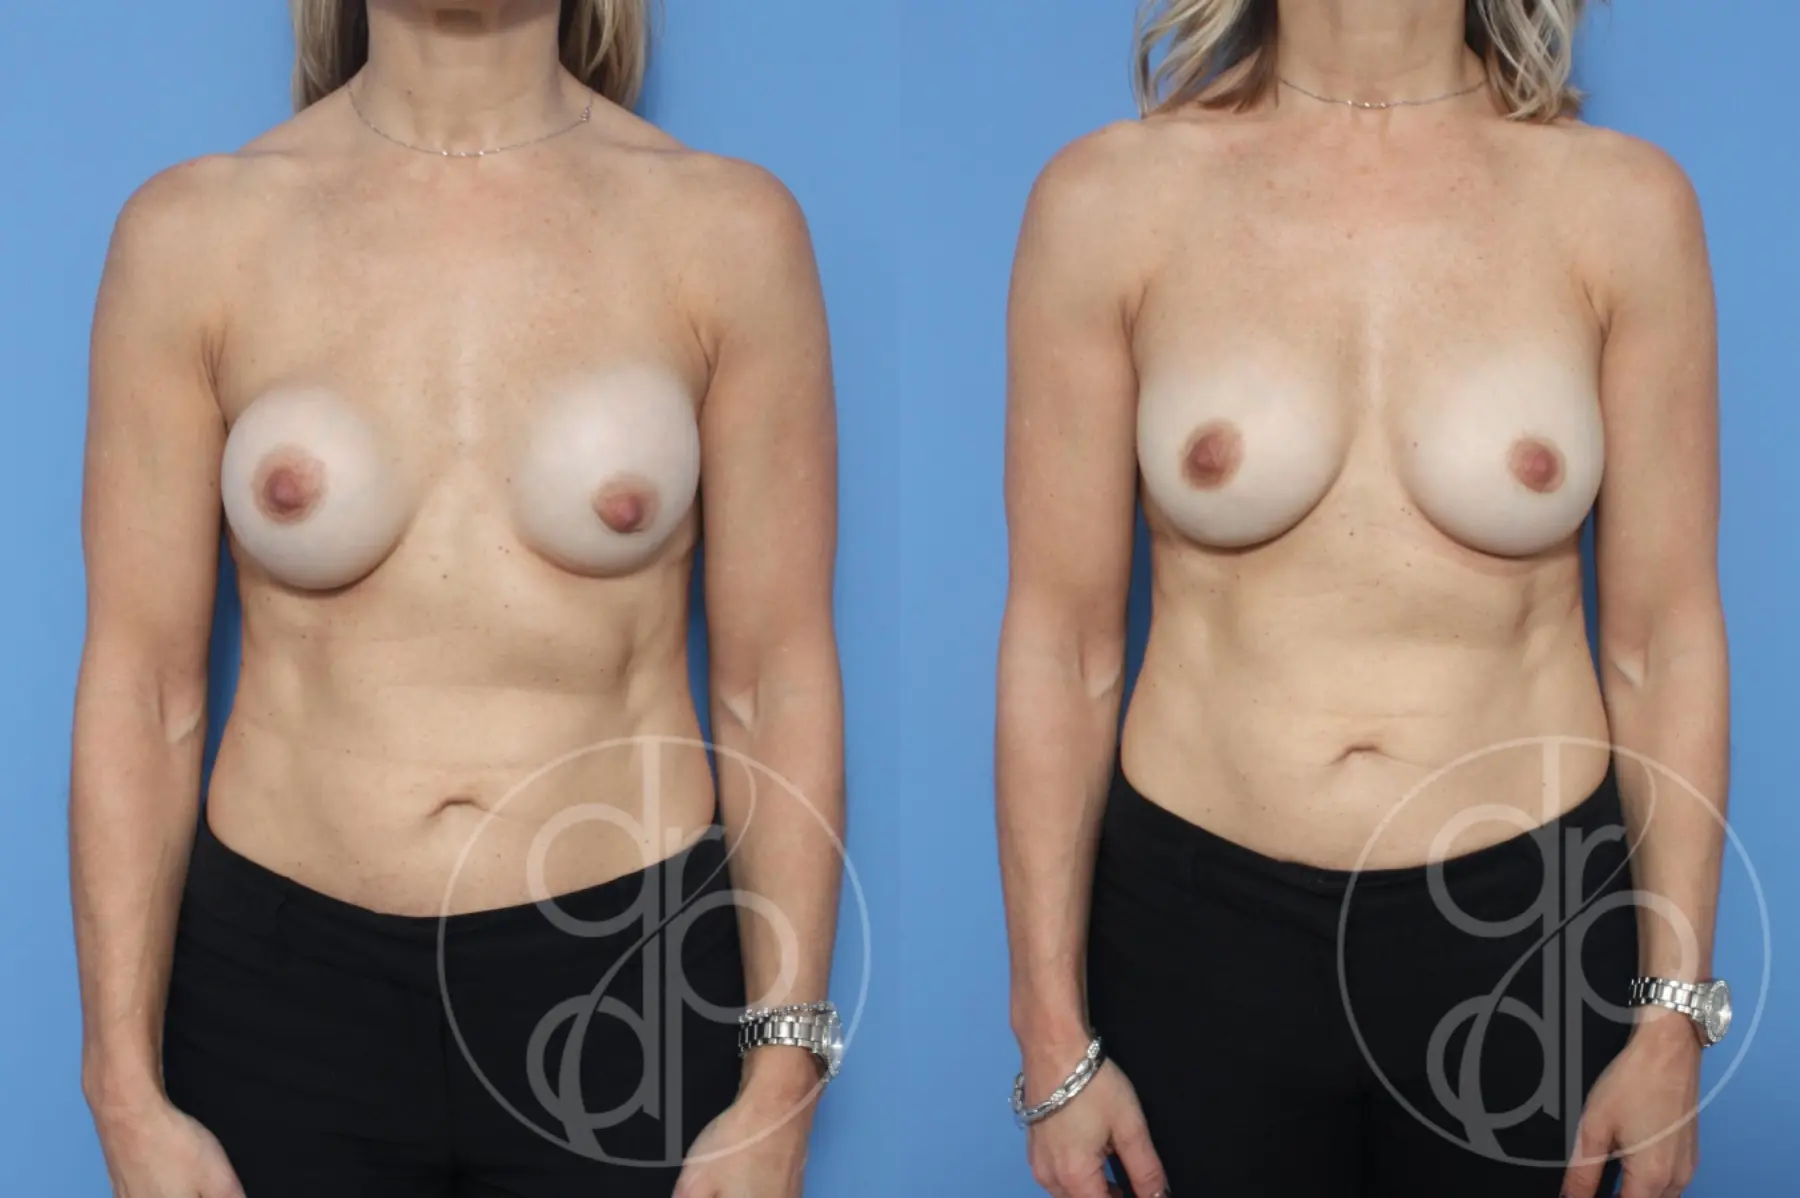 patient 10500 remove and replace breast implants before and after result - Before and After 1